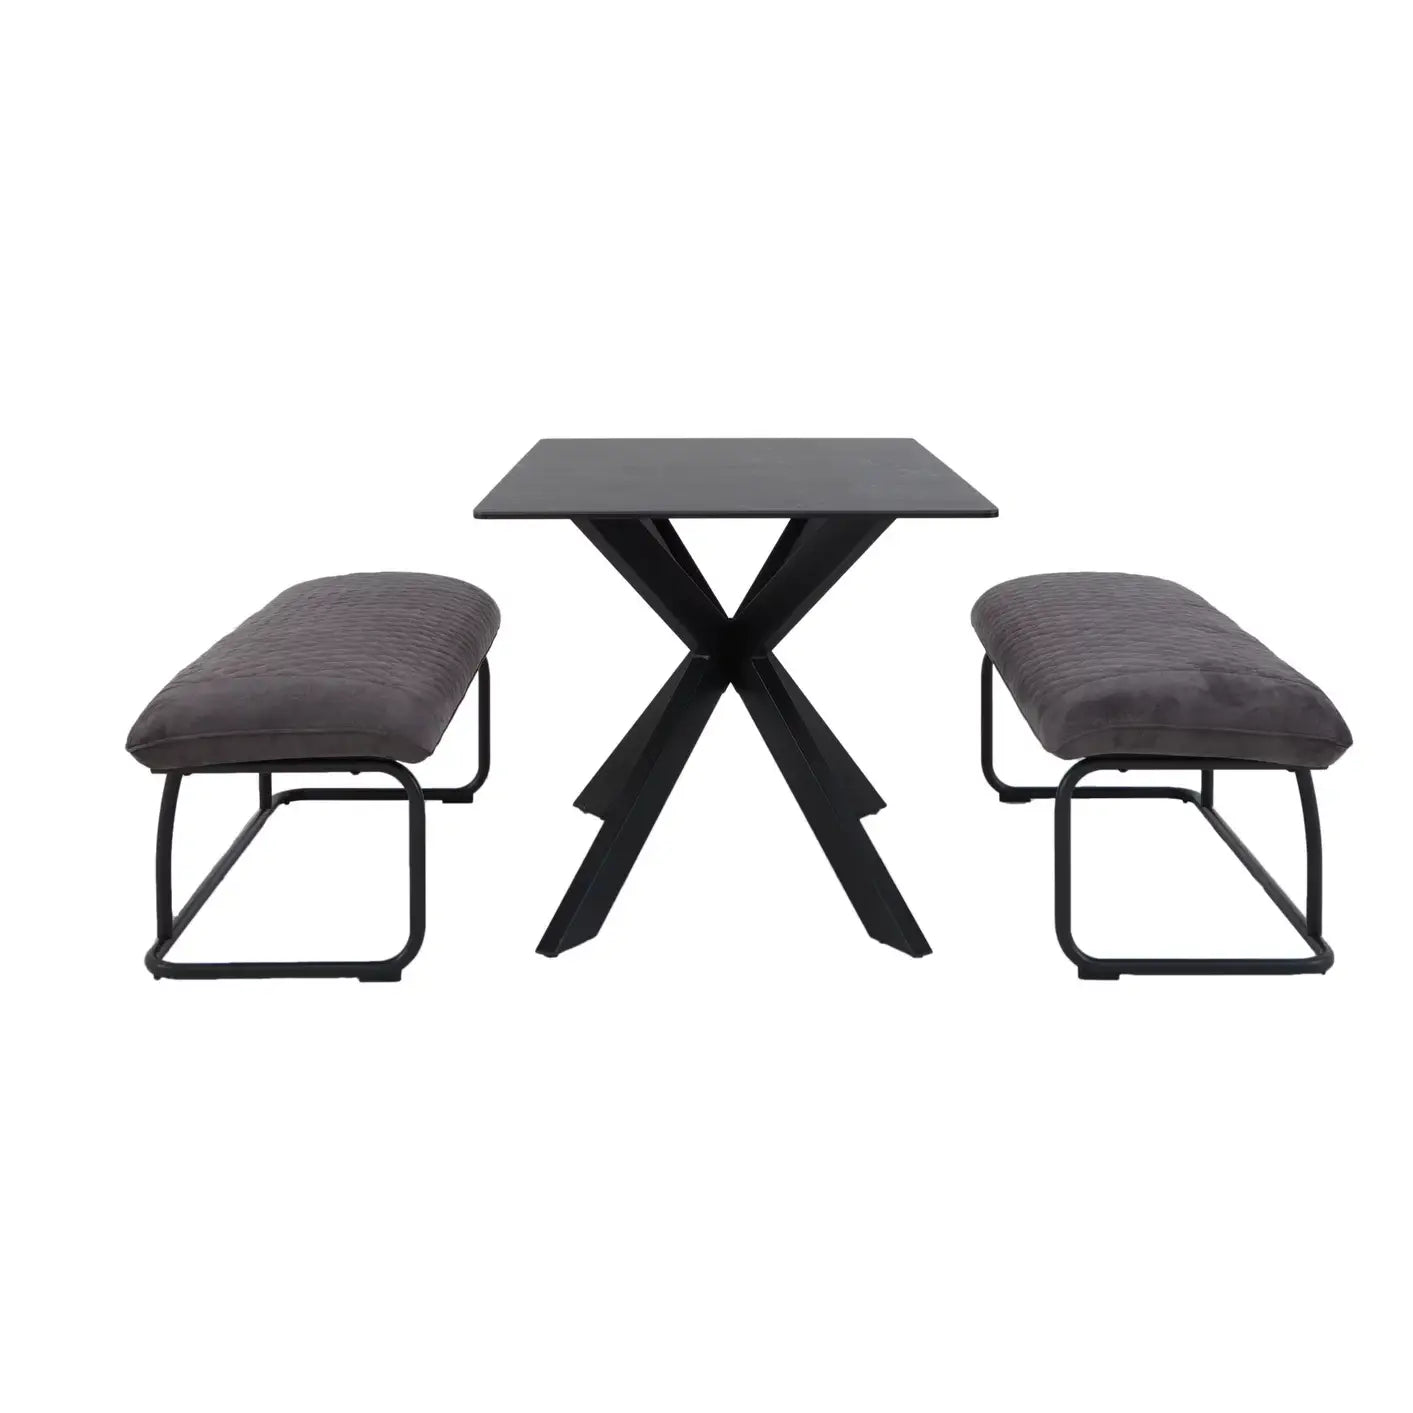 Creed Small Table with 2 Low Benches Dining Set